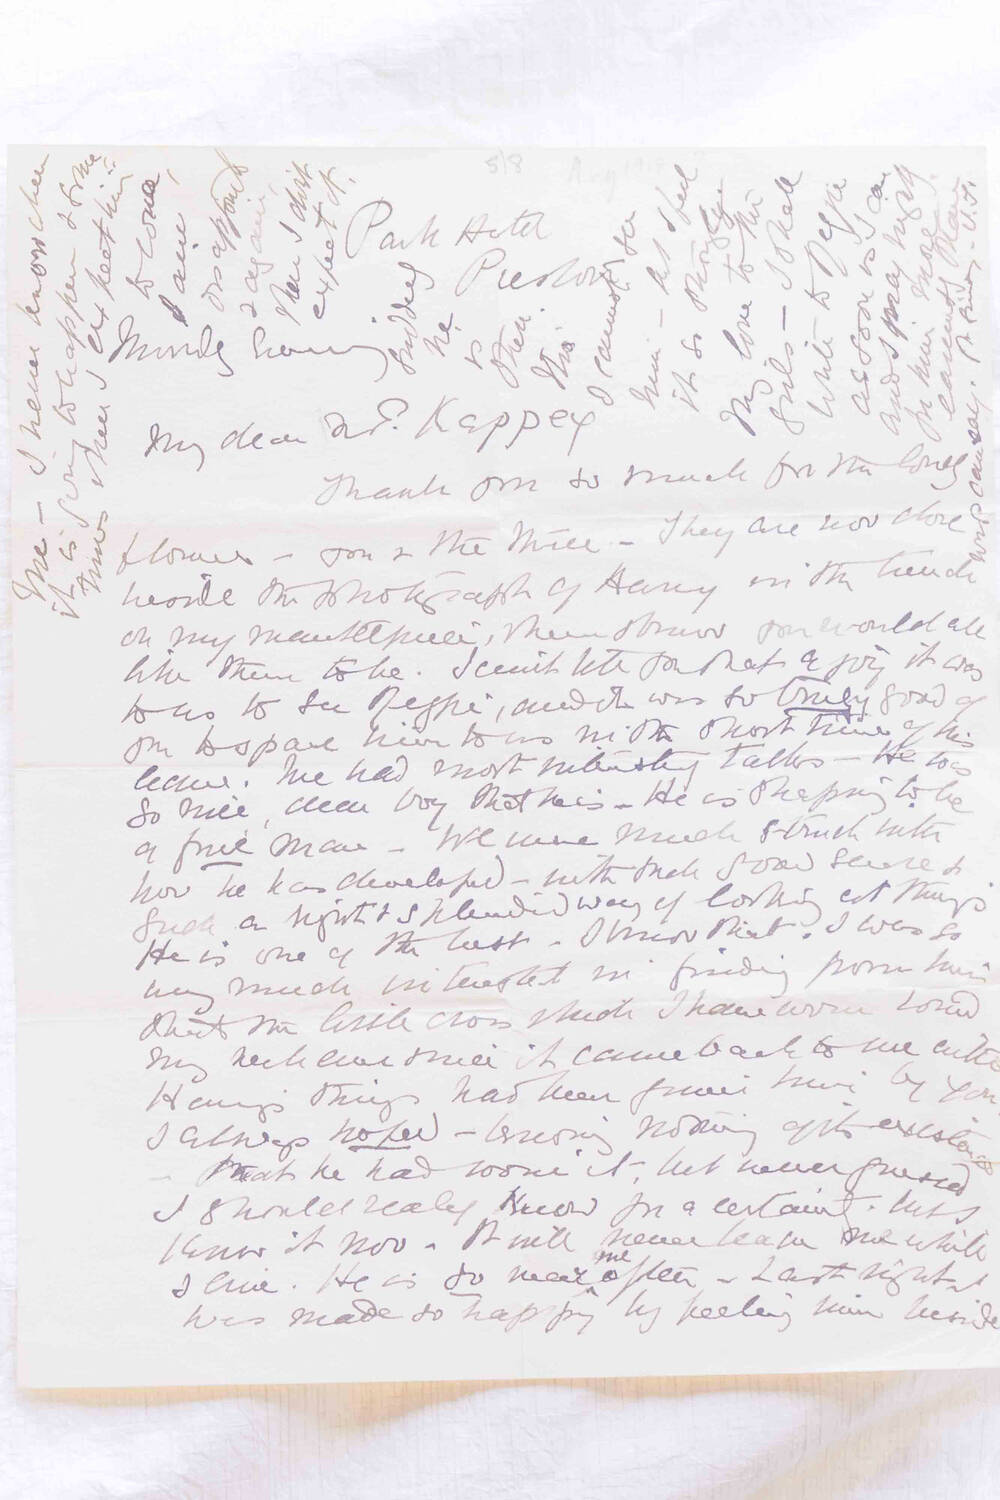 Letter from Violet Jacob to Mrs Kappey, August 1919